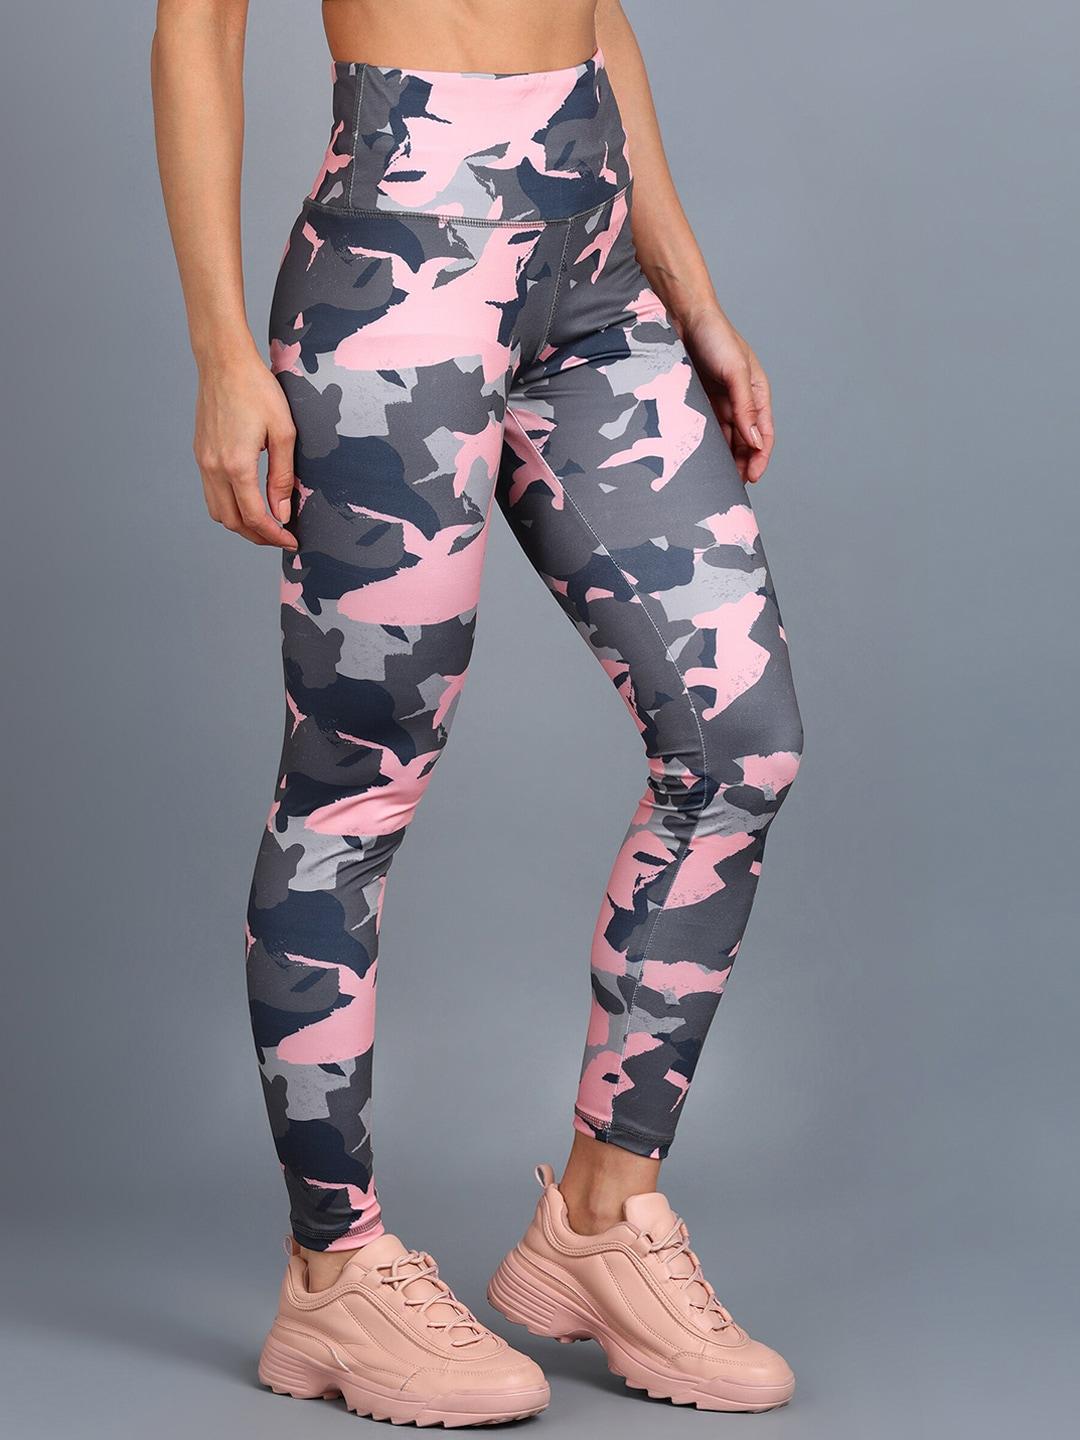 rock-paper-scissors-women-peach-coloured-camouflage-printed-ankle-length-training-tights